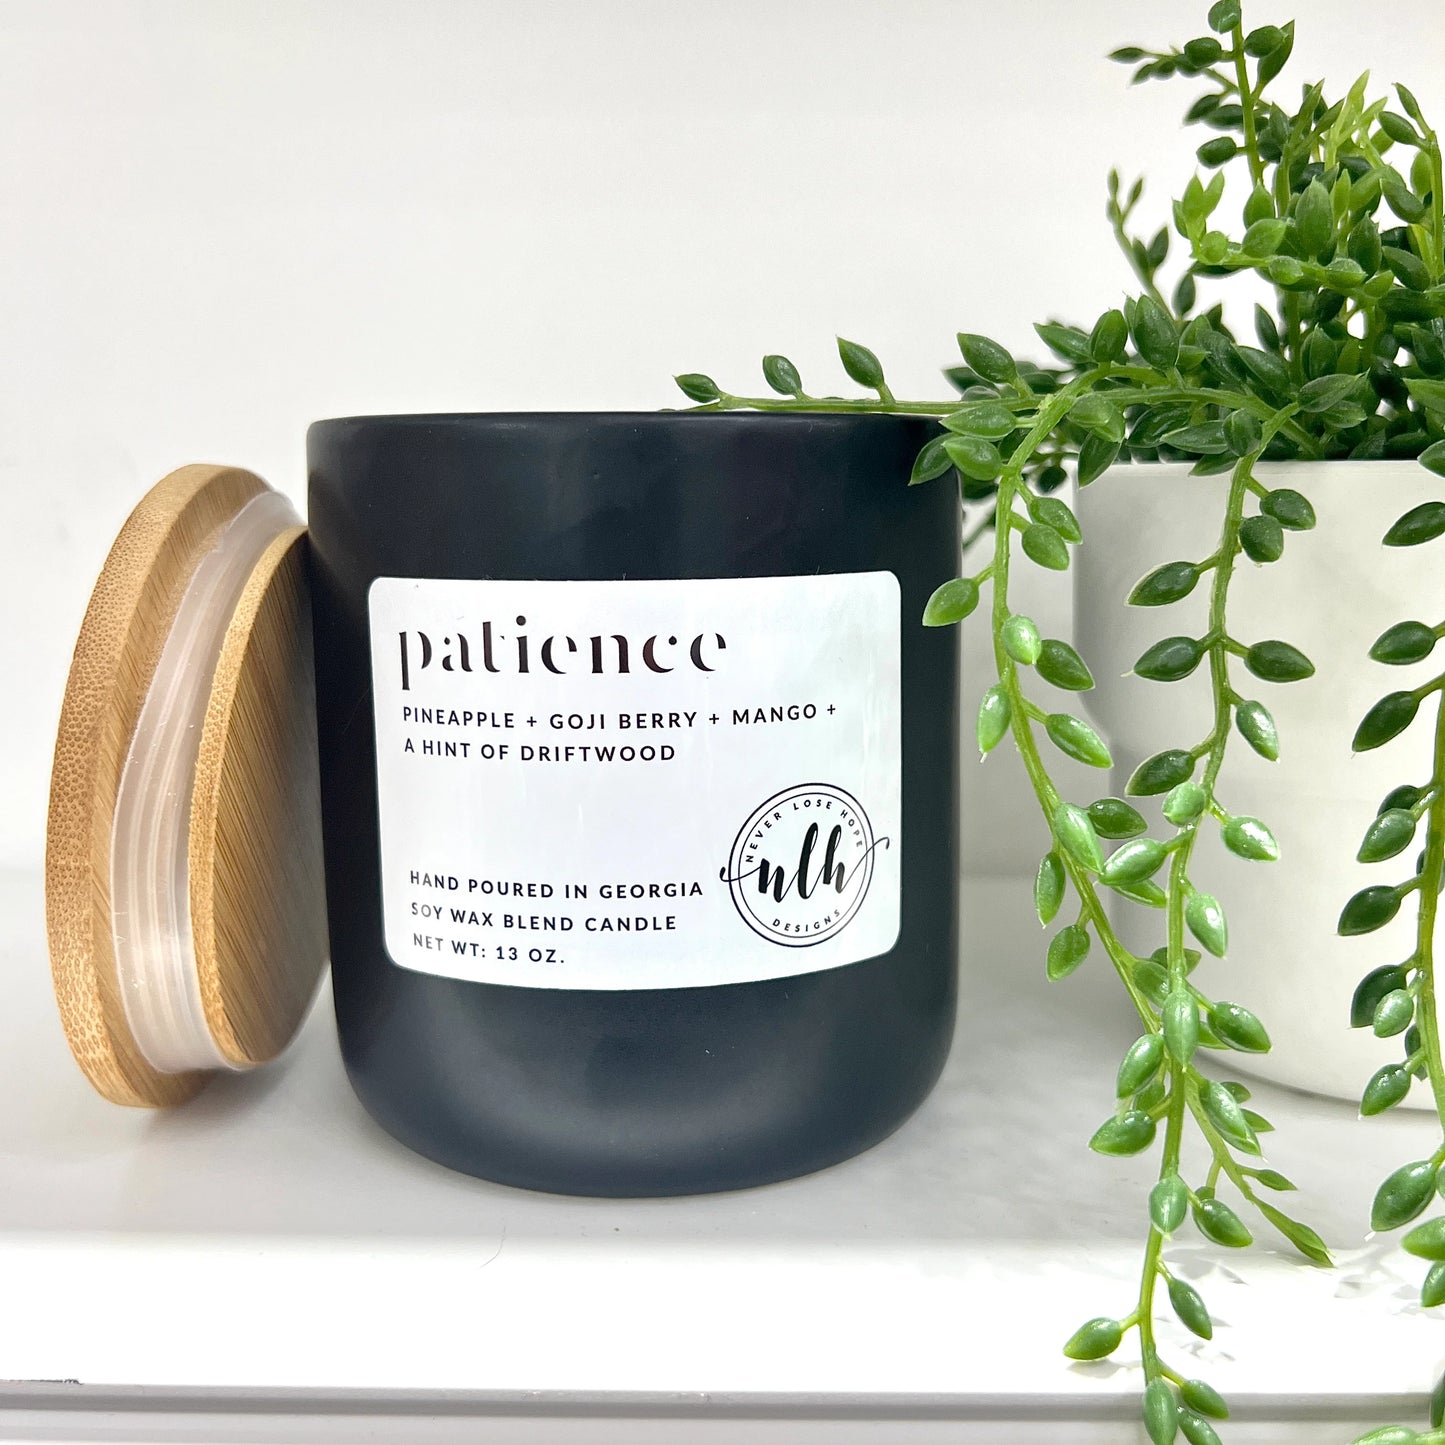 Never Lose Hope® Soy wax blend Candle- "Patience"